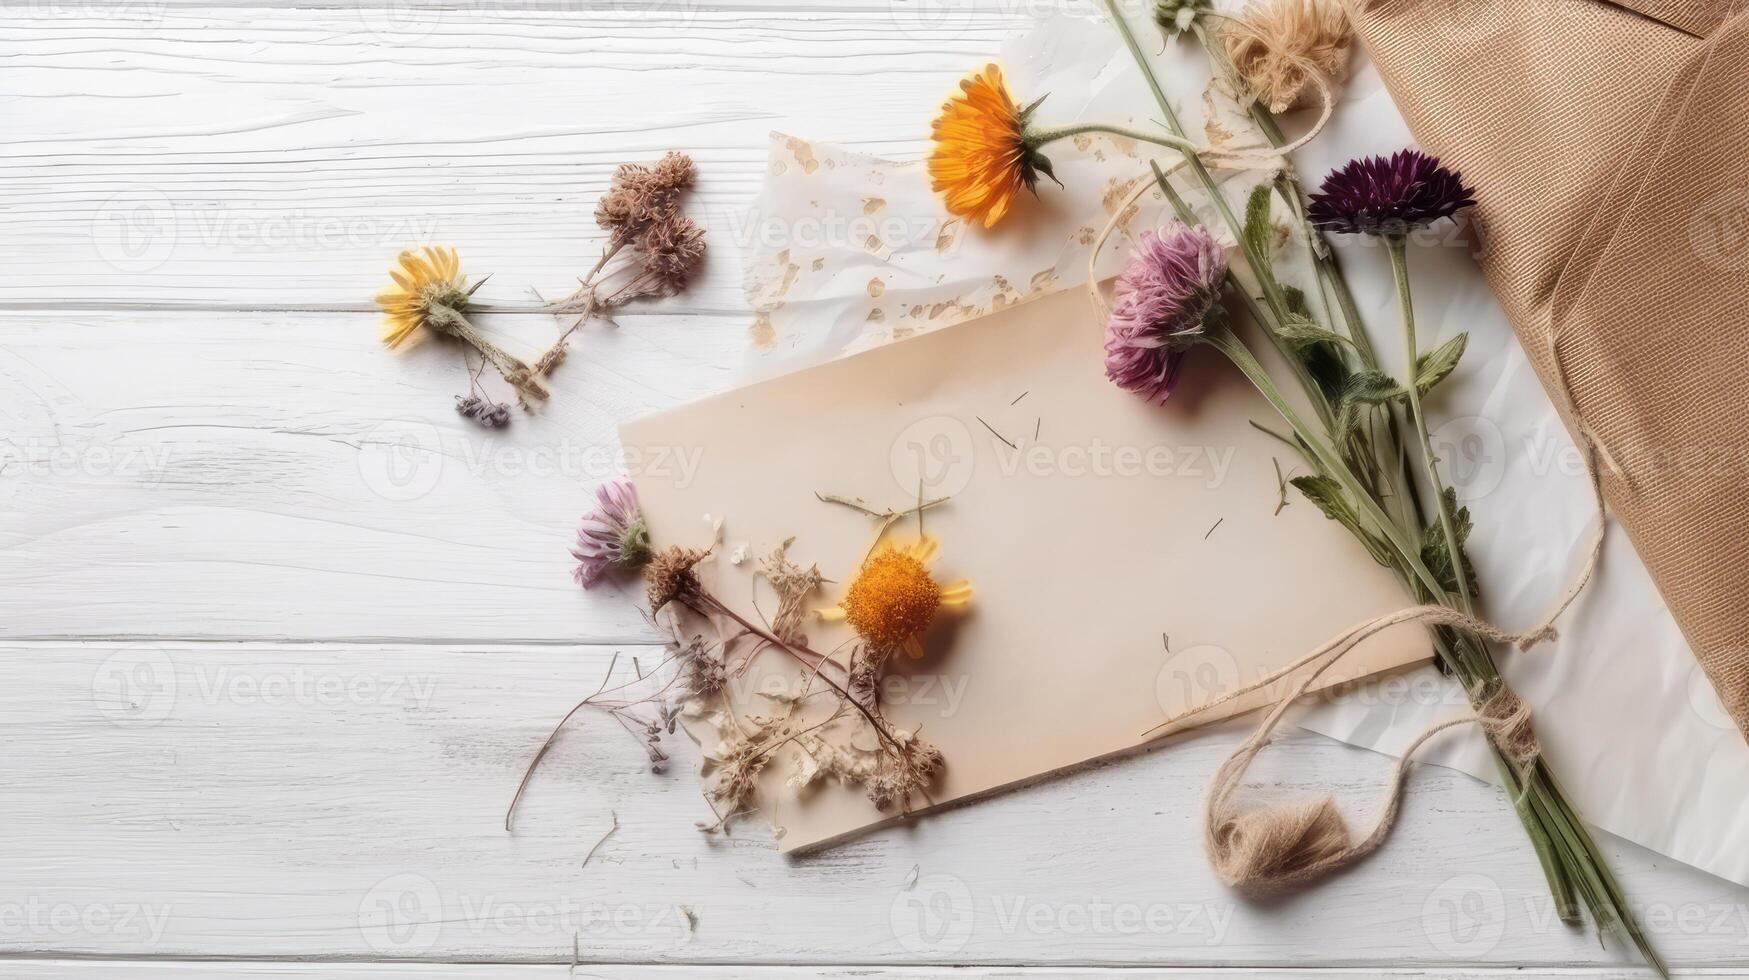 Top View of Blank Paper Card Mockup and Rustic Floral Decorations, Burlap on White Wooden Texture Table. . photo